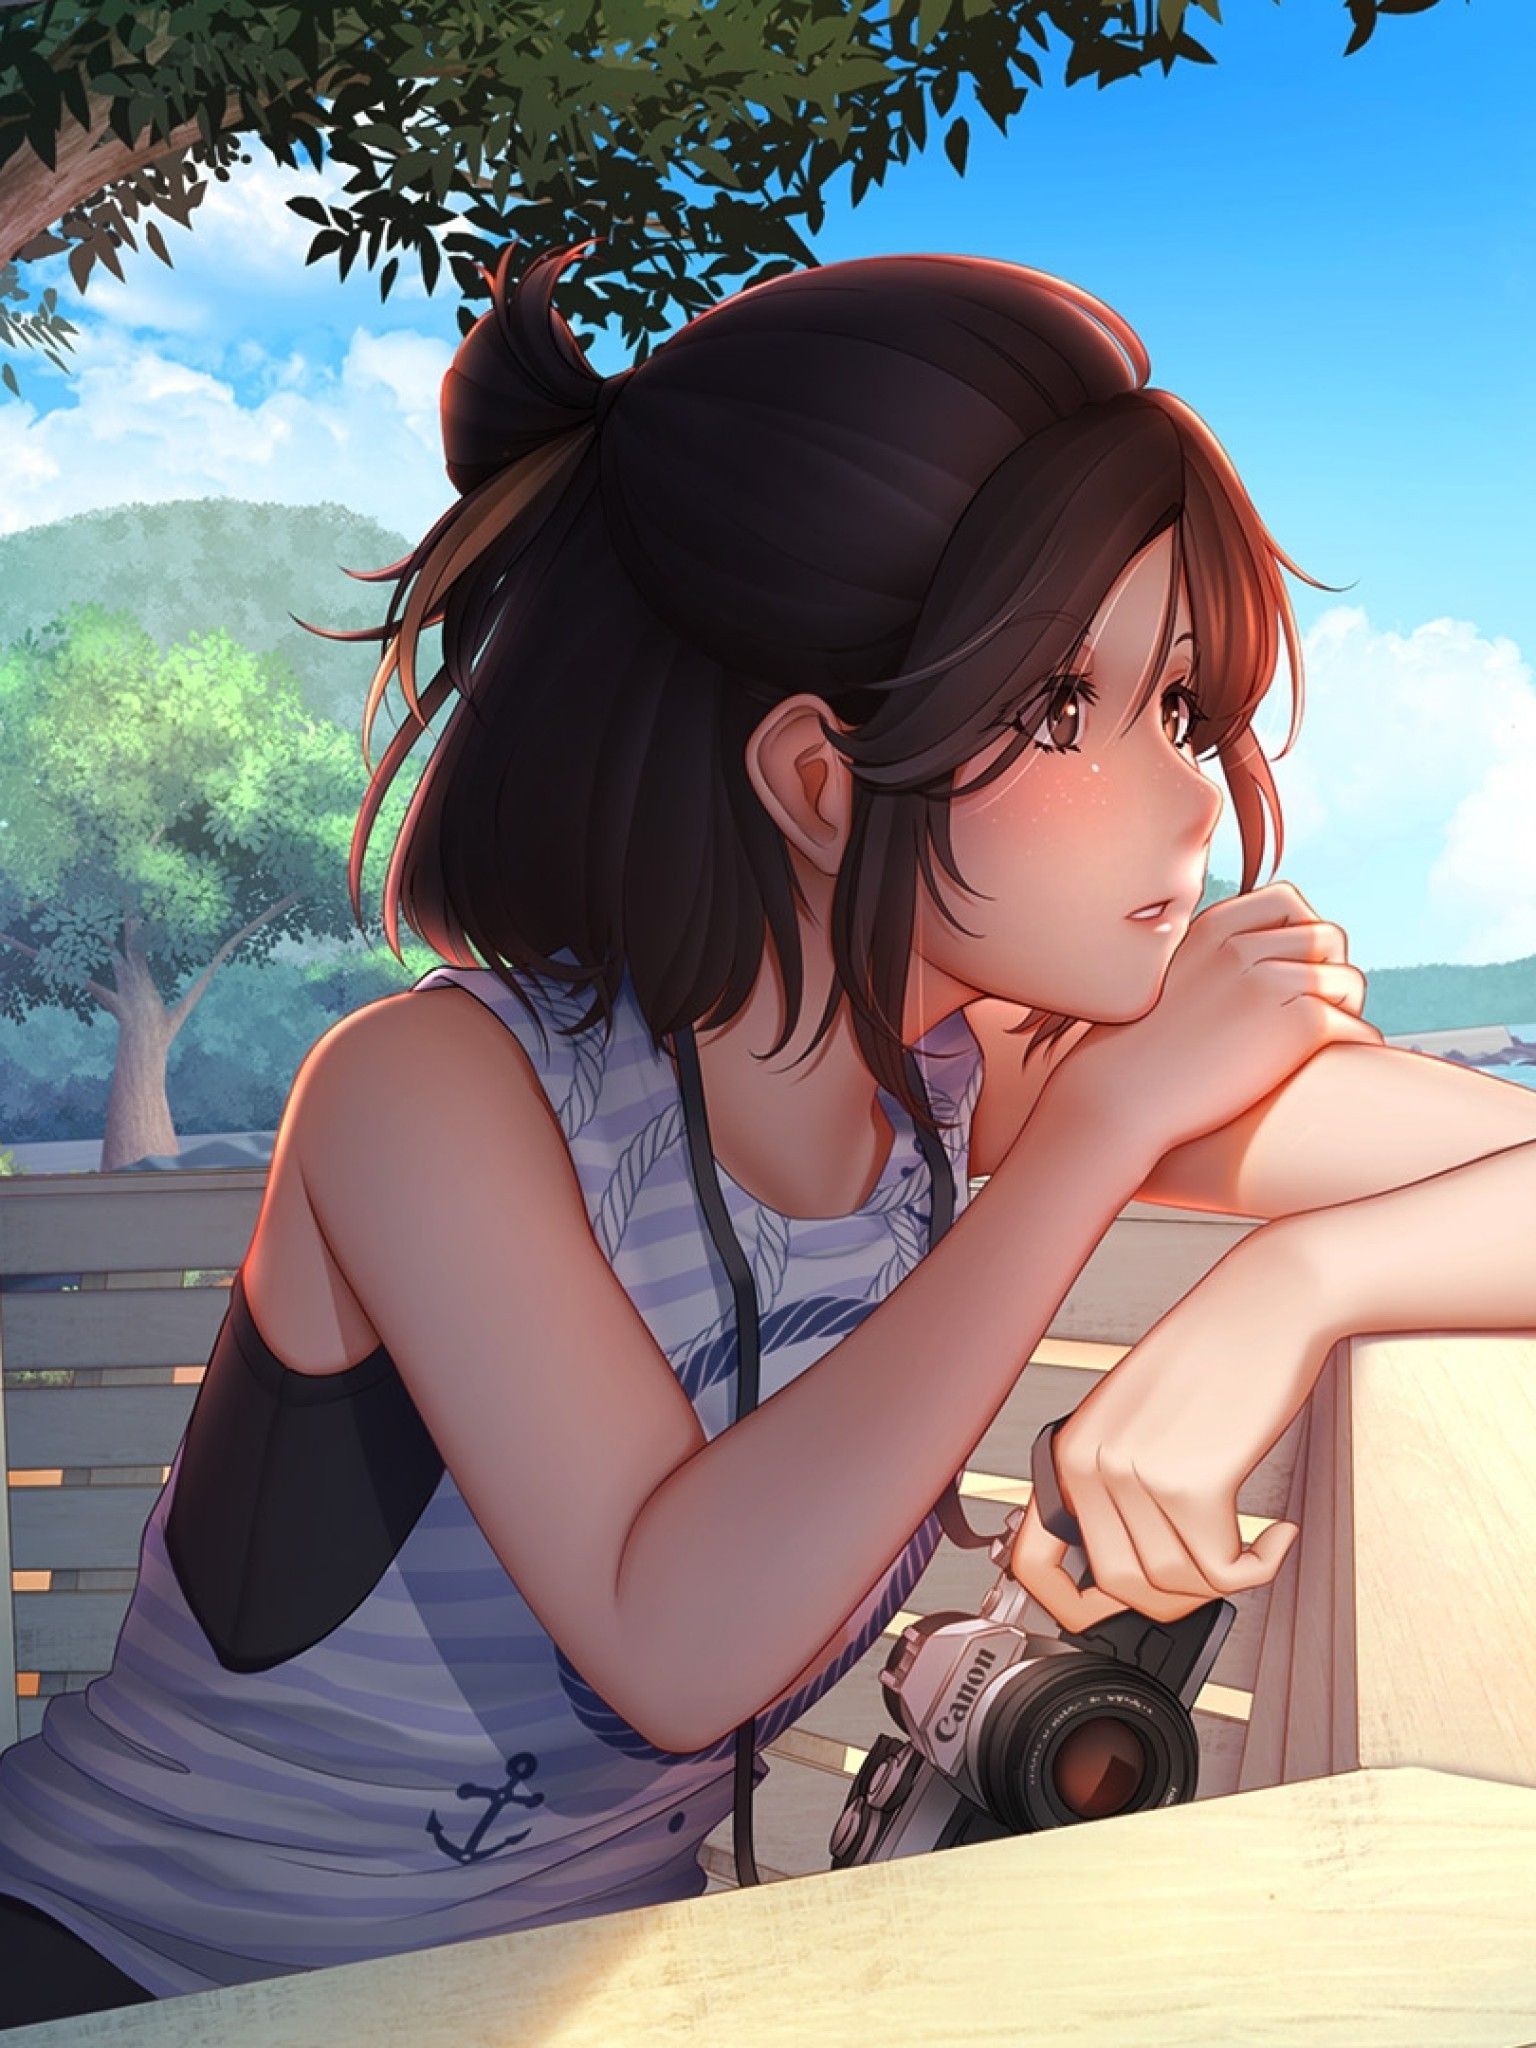 Download 1536x2048 Anime Girl, Summer, Cannon, Looking Away, Semi